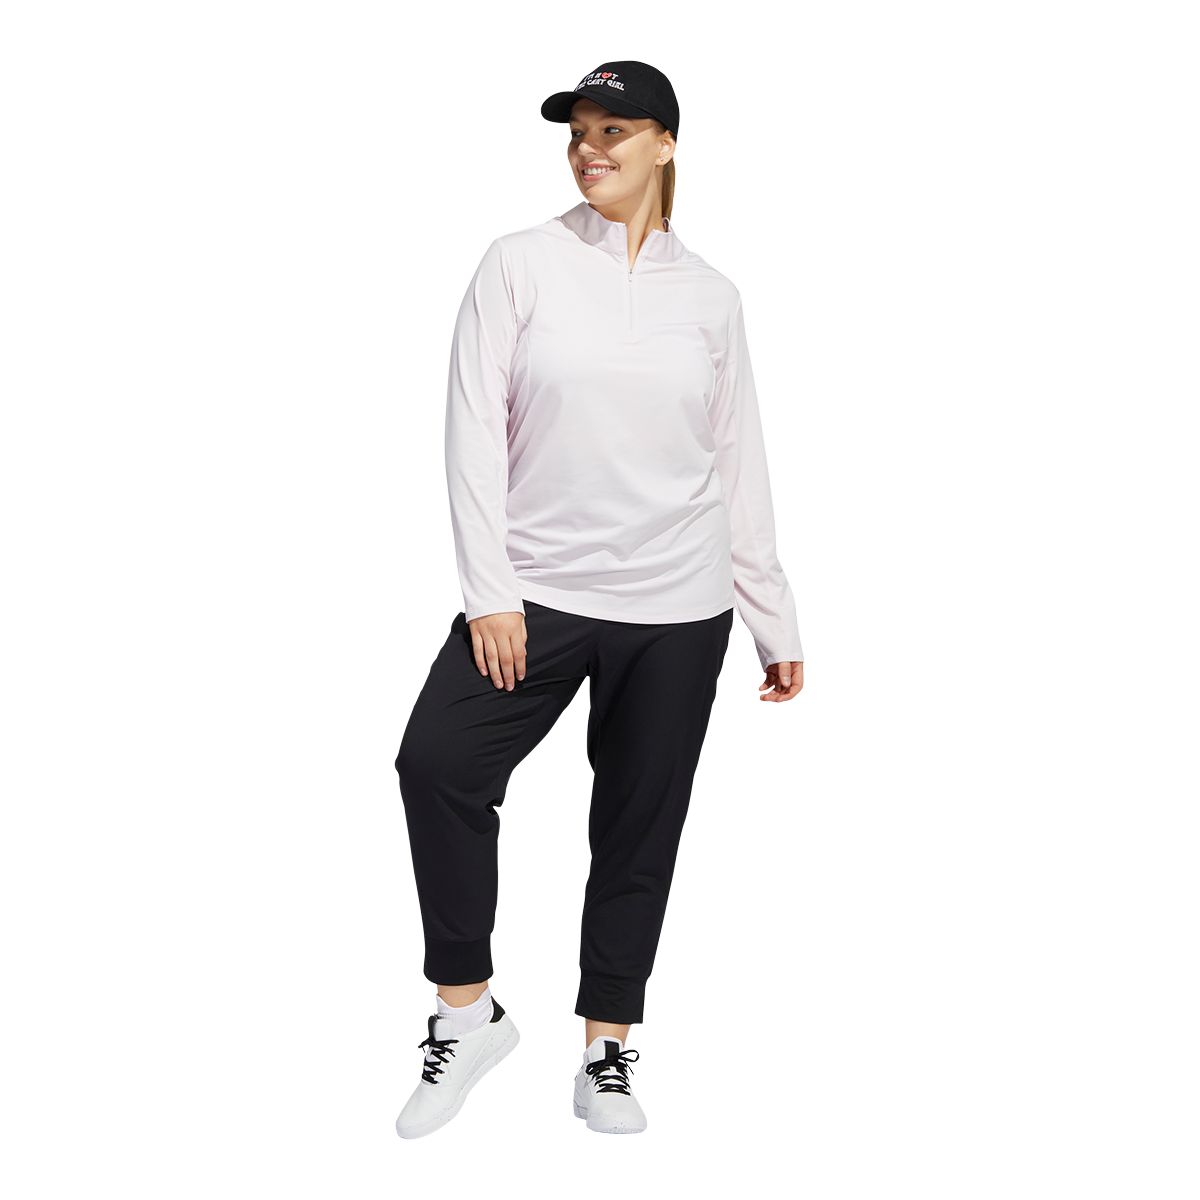 Callaway Women's Pull-On Stretch Woven Golf Joggers